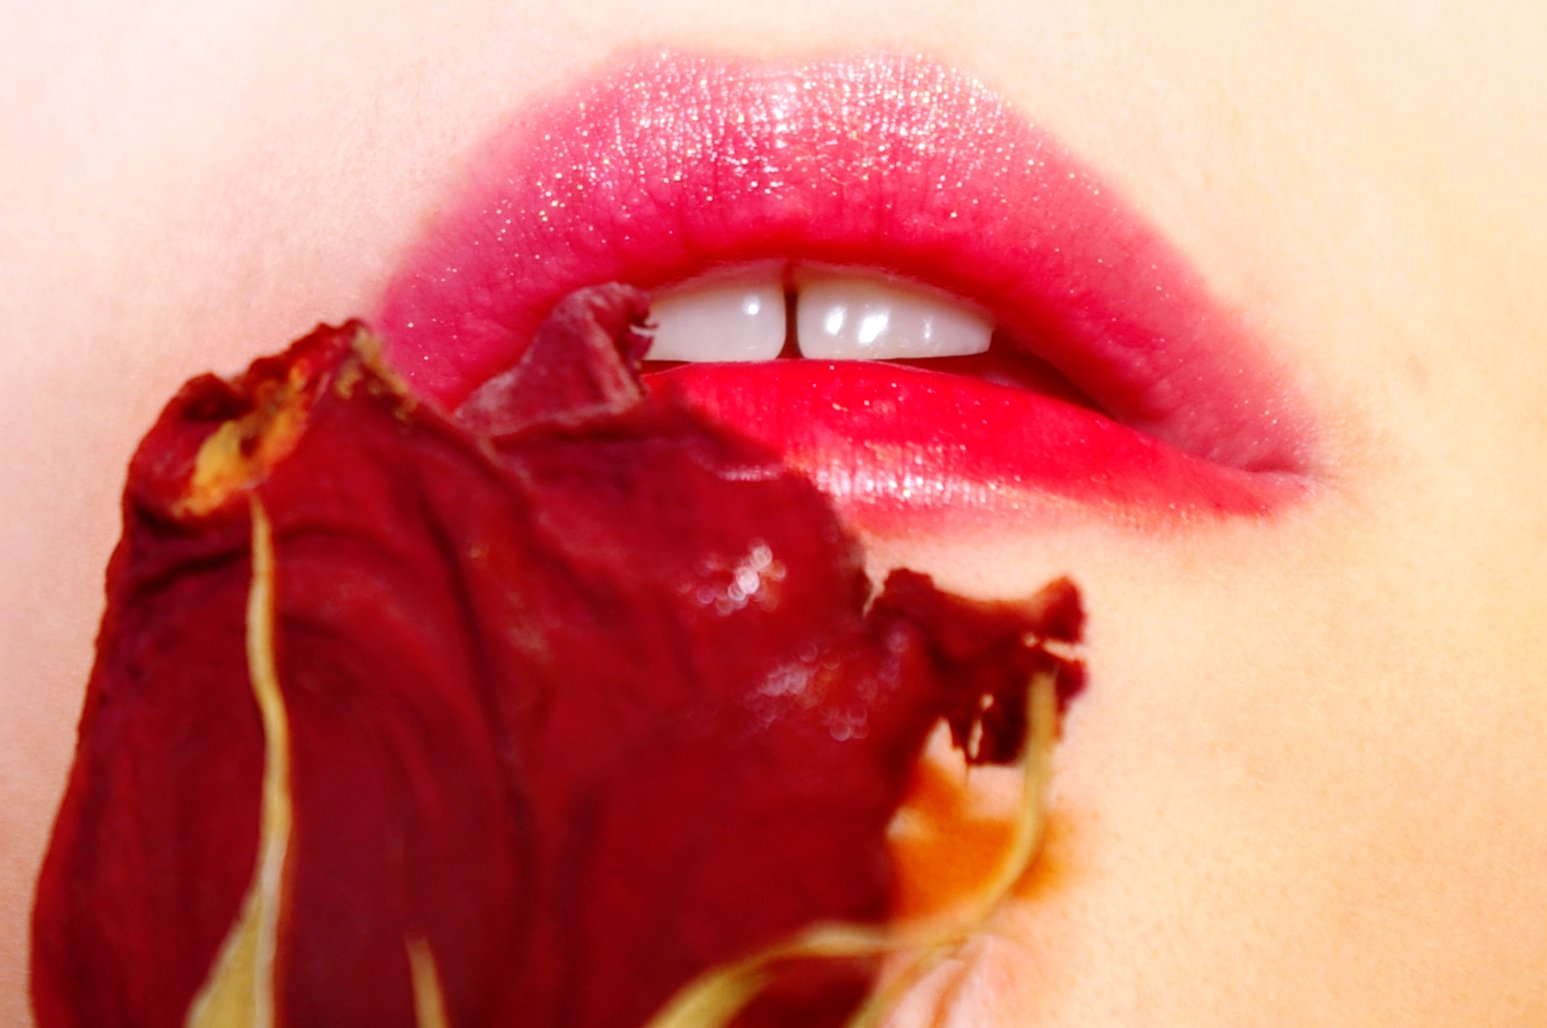 a woman's lip with a rose growing out of it